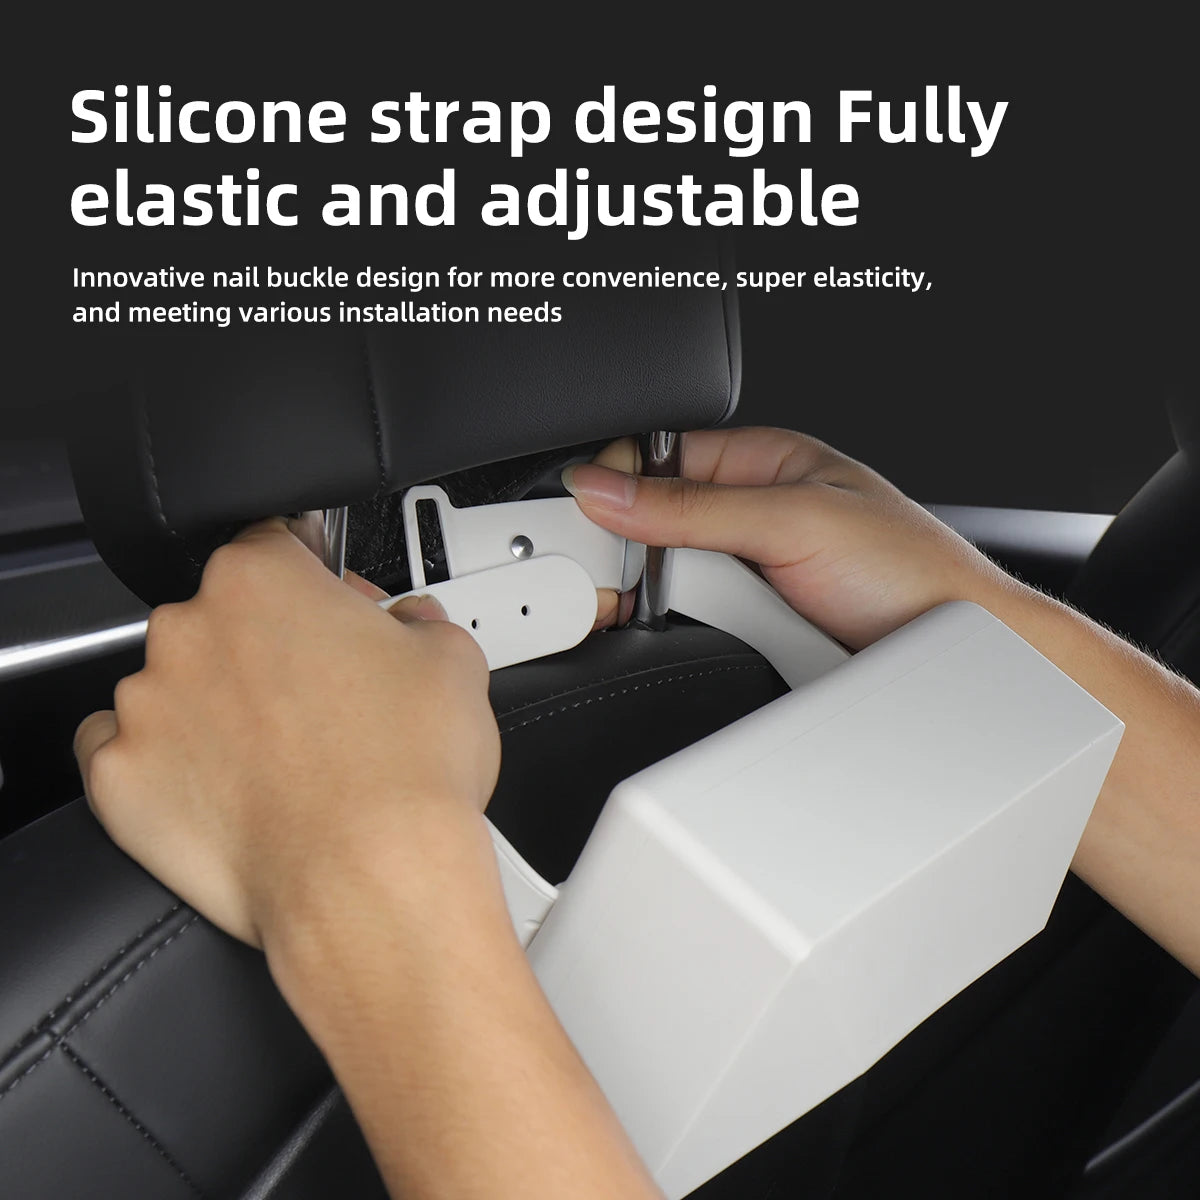 Cyberrack Silicone Tesla Tissue Box - Keep Your Tesla Interior Neat and Tidy